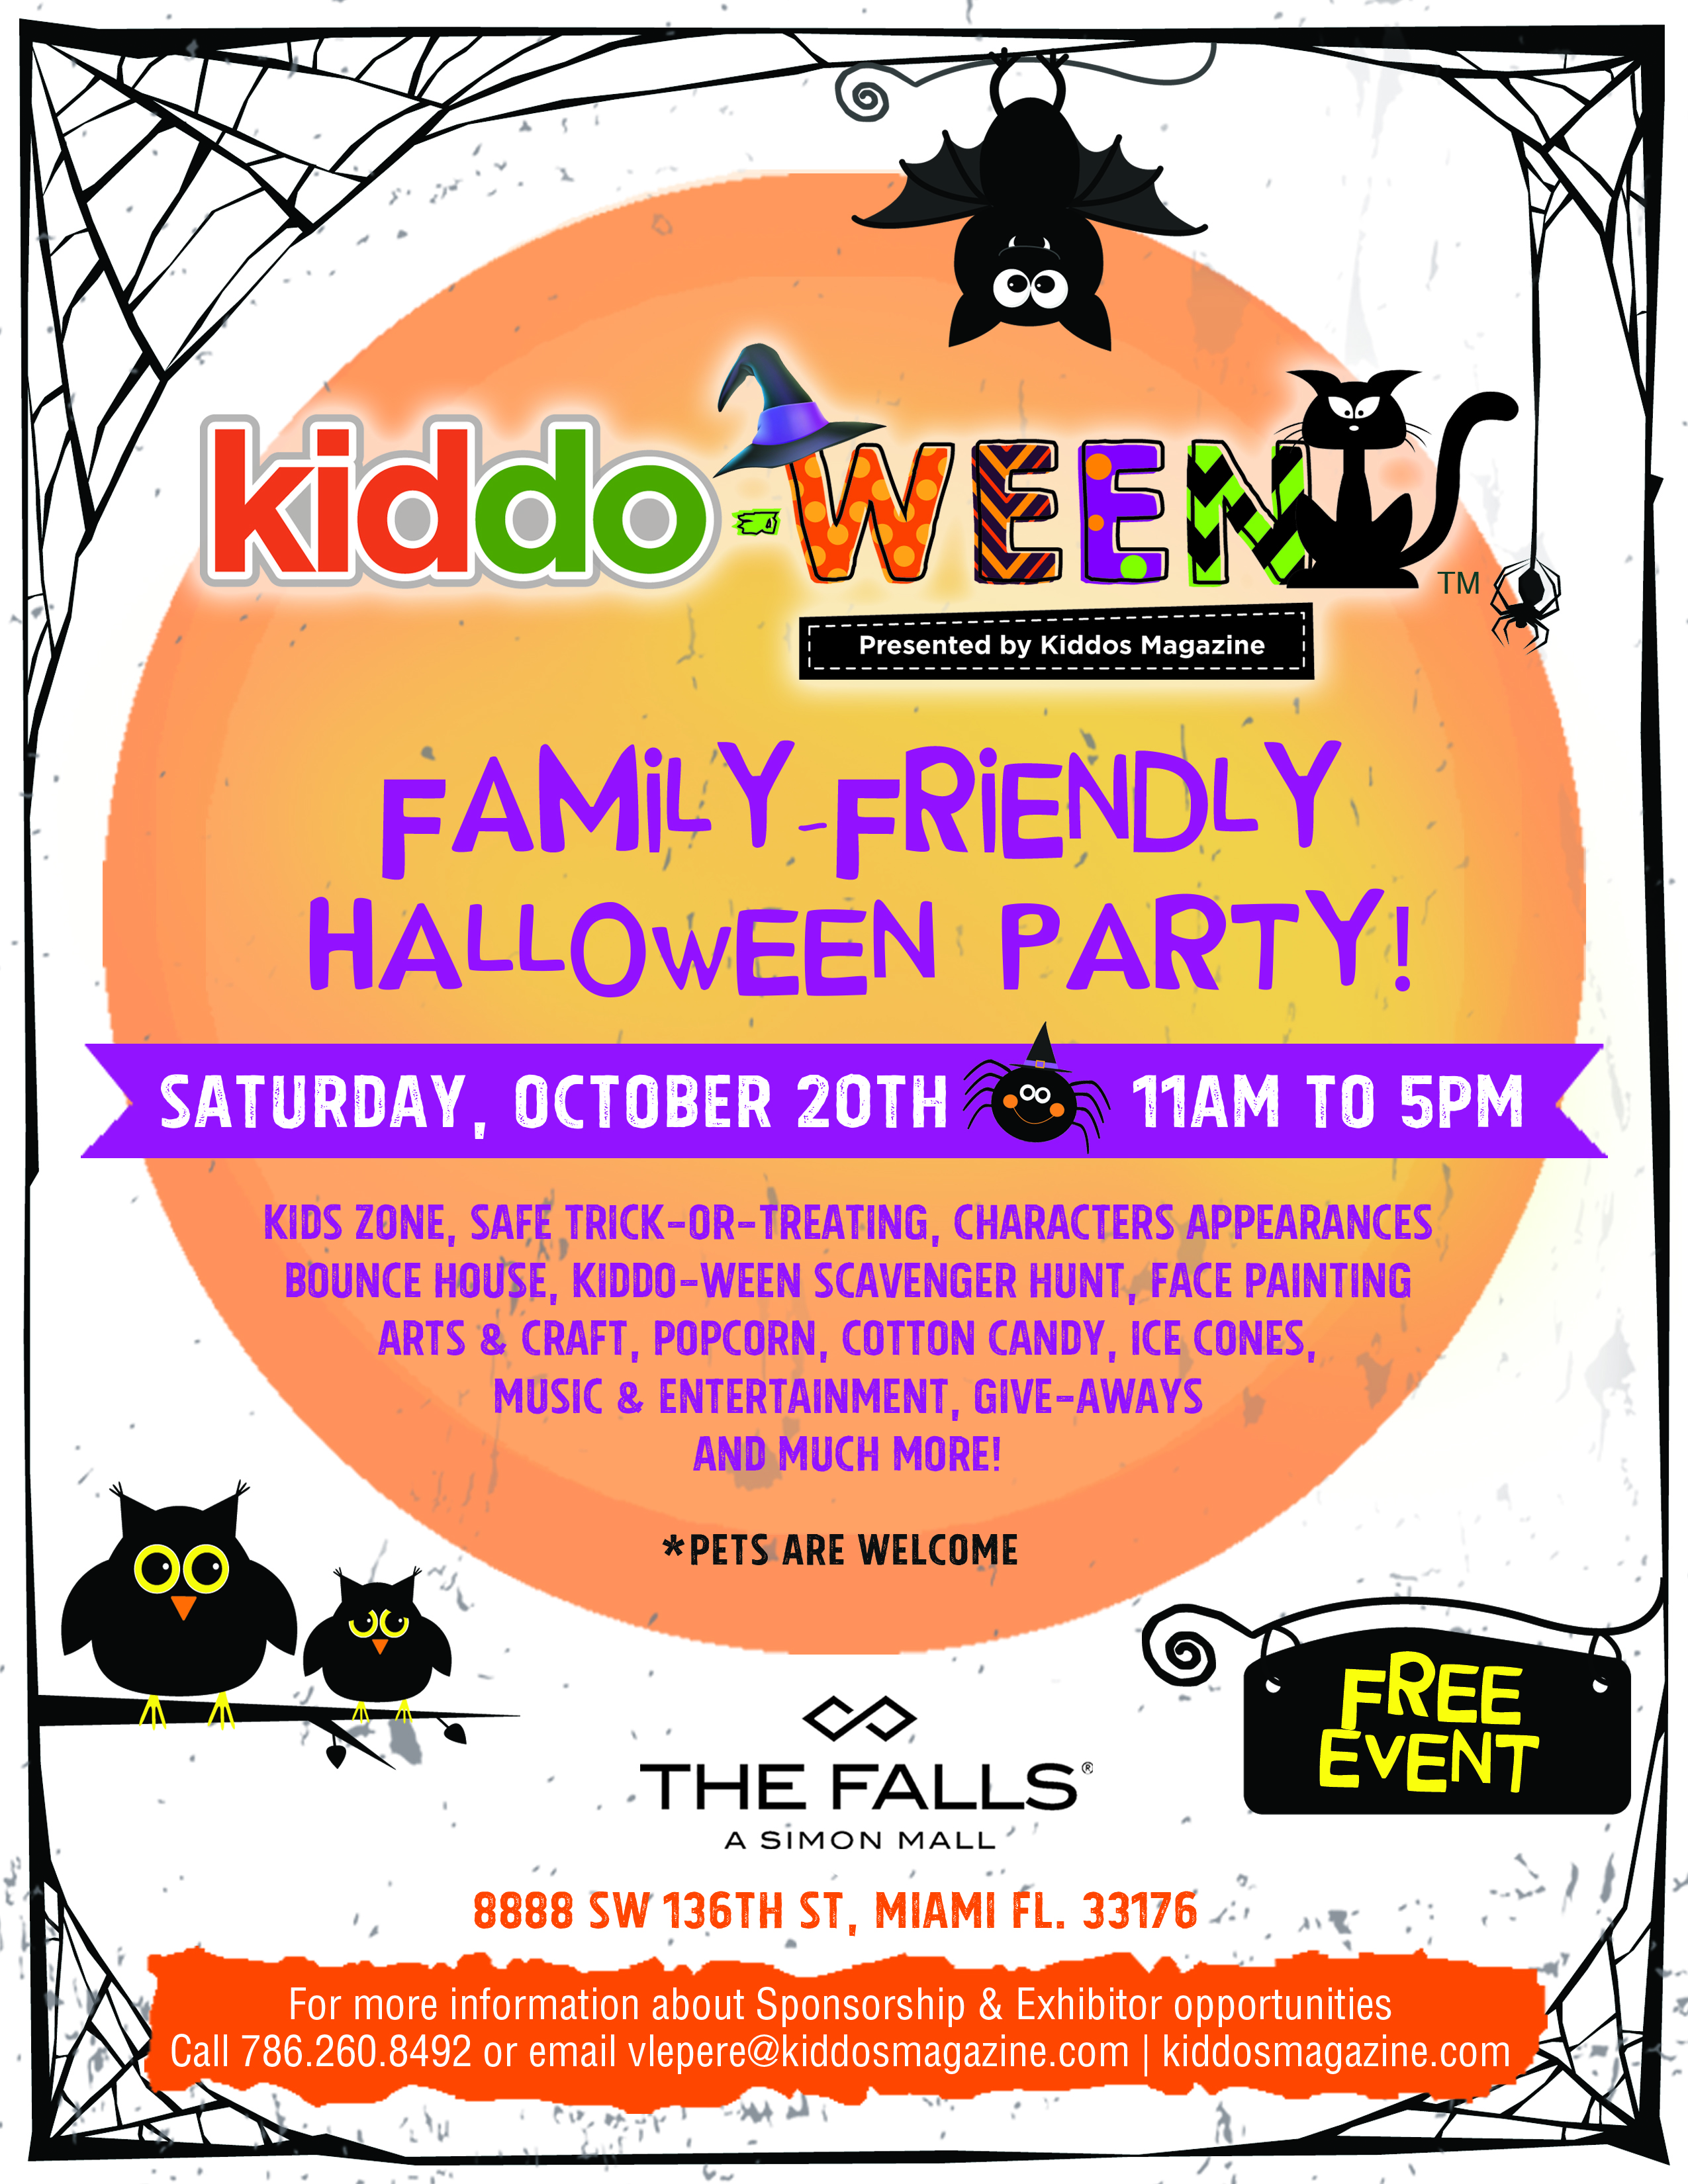 Kiddo-Ween Party Event Flyer - For more information about sponsorship & exhibitor opportunities, call 786.260.8492 or email vlepere@kiddosmagazine.com. Visit kiddosmagazine.com